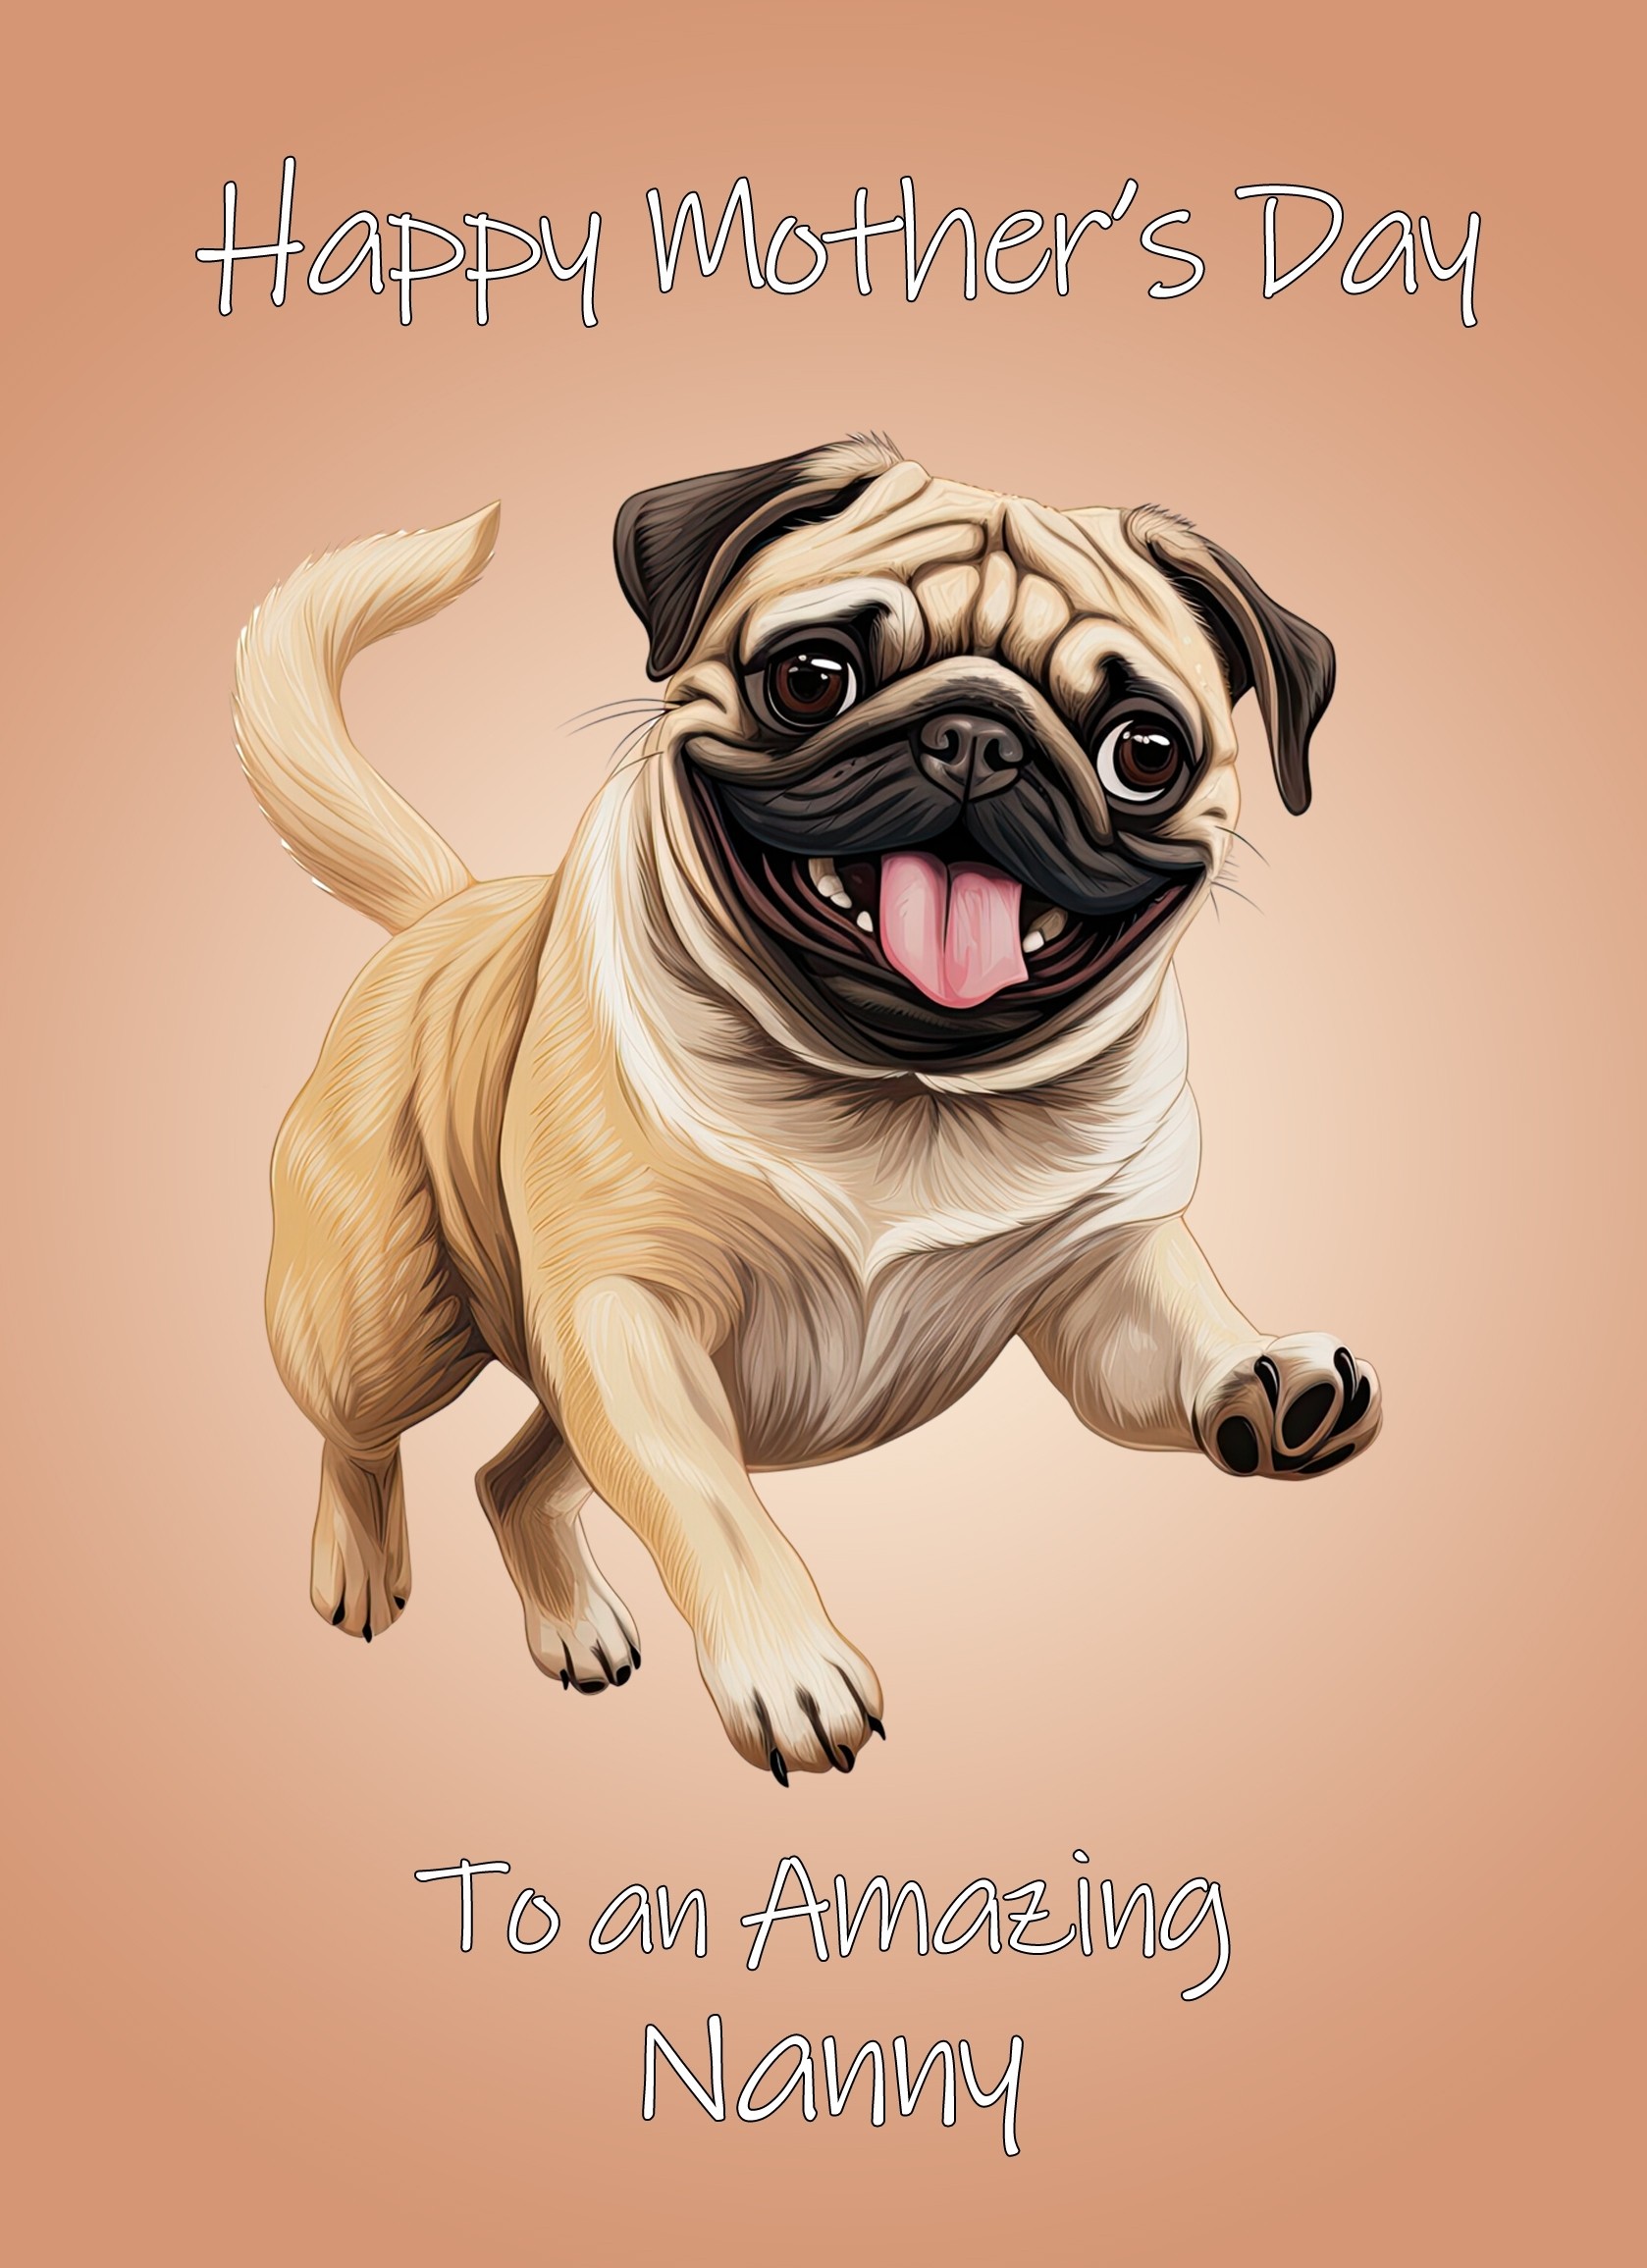 Pug Dog Mothers Day Card For Nanny